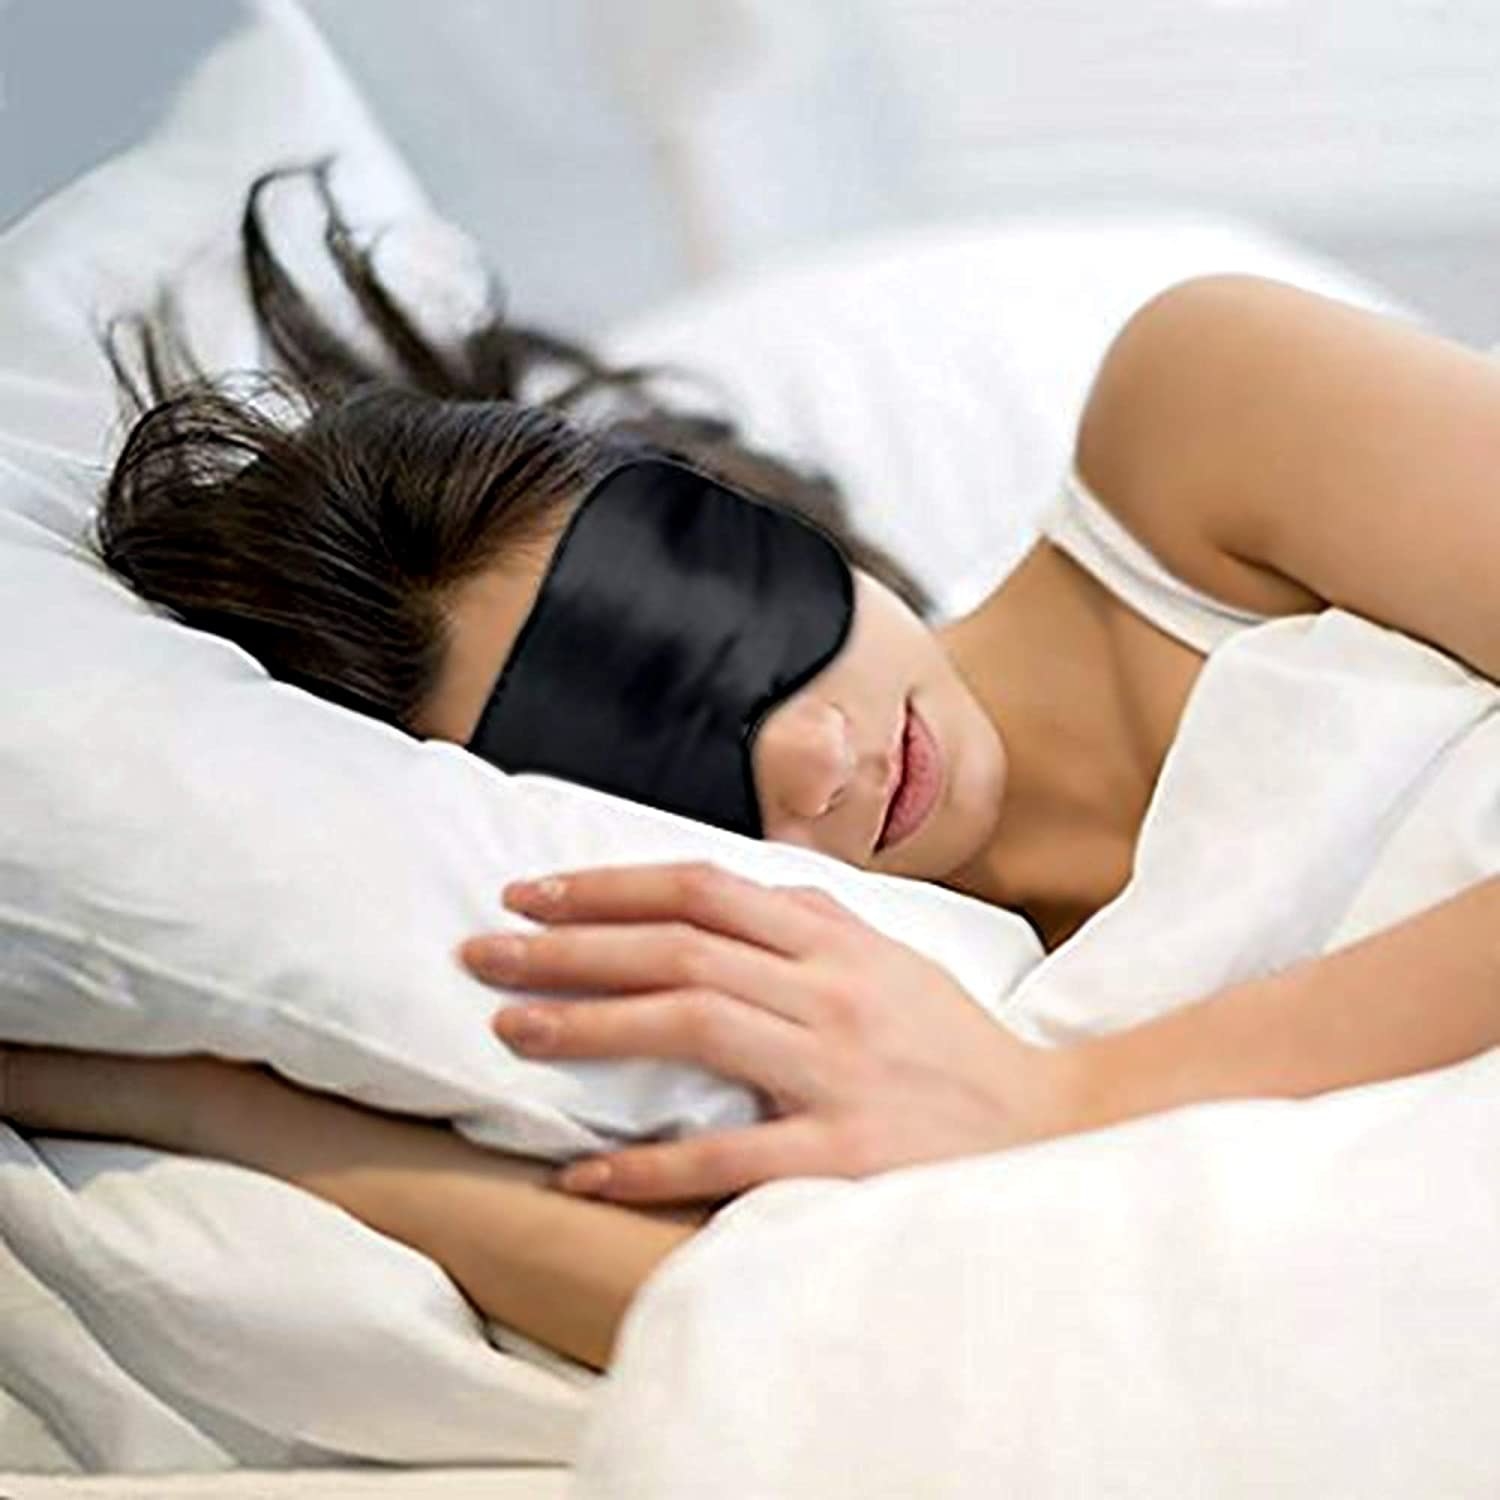 A woman sleeping with the eye mask on.